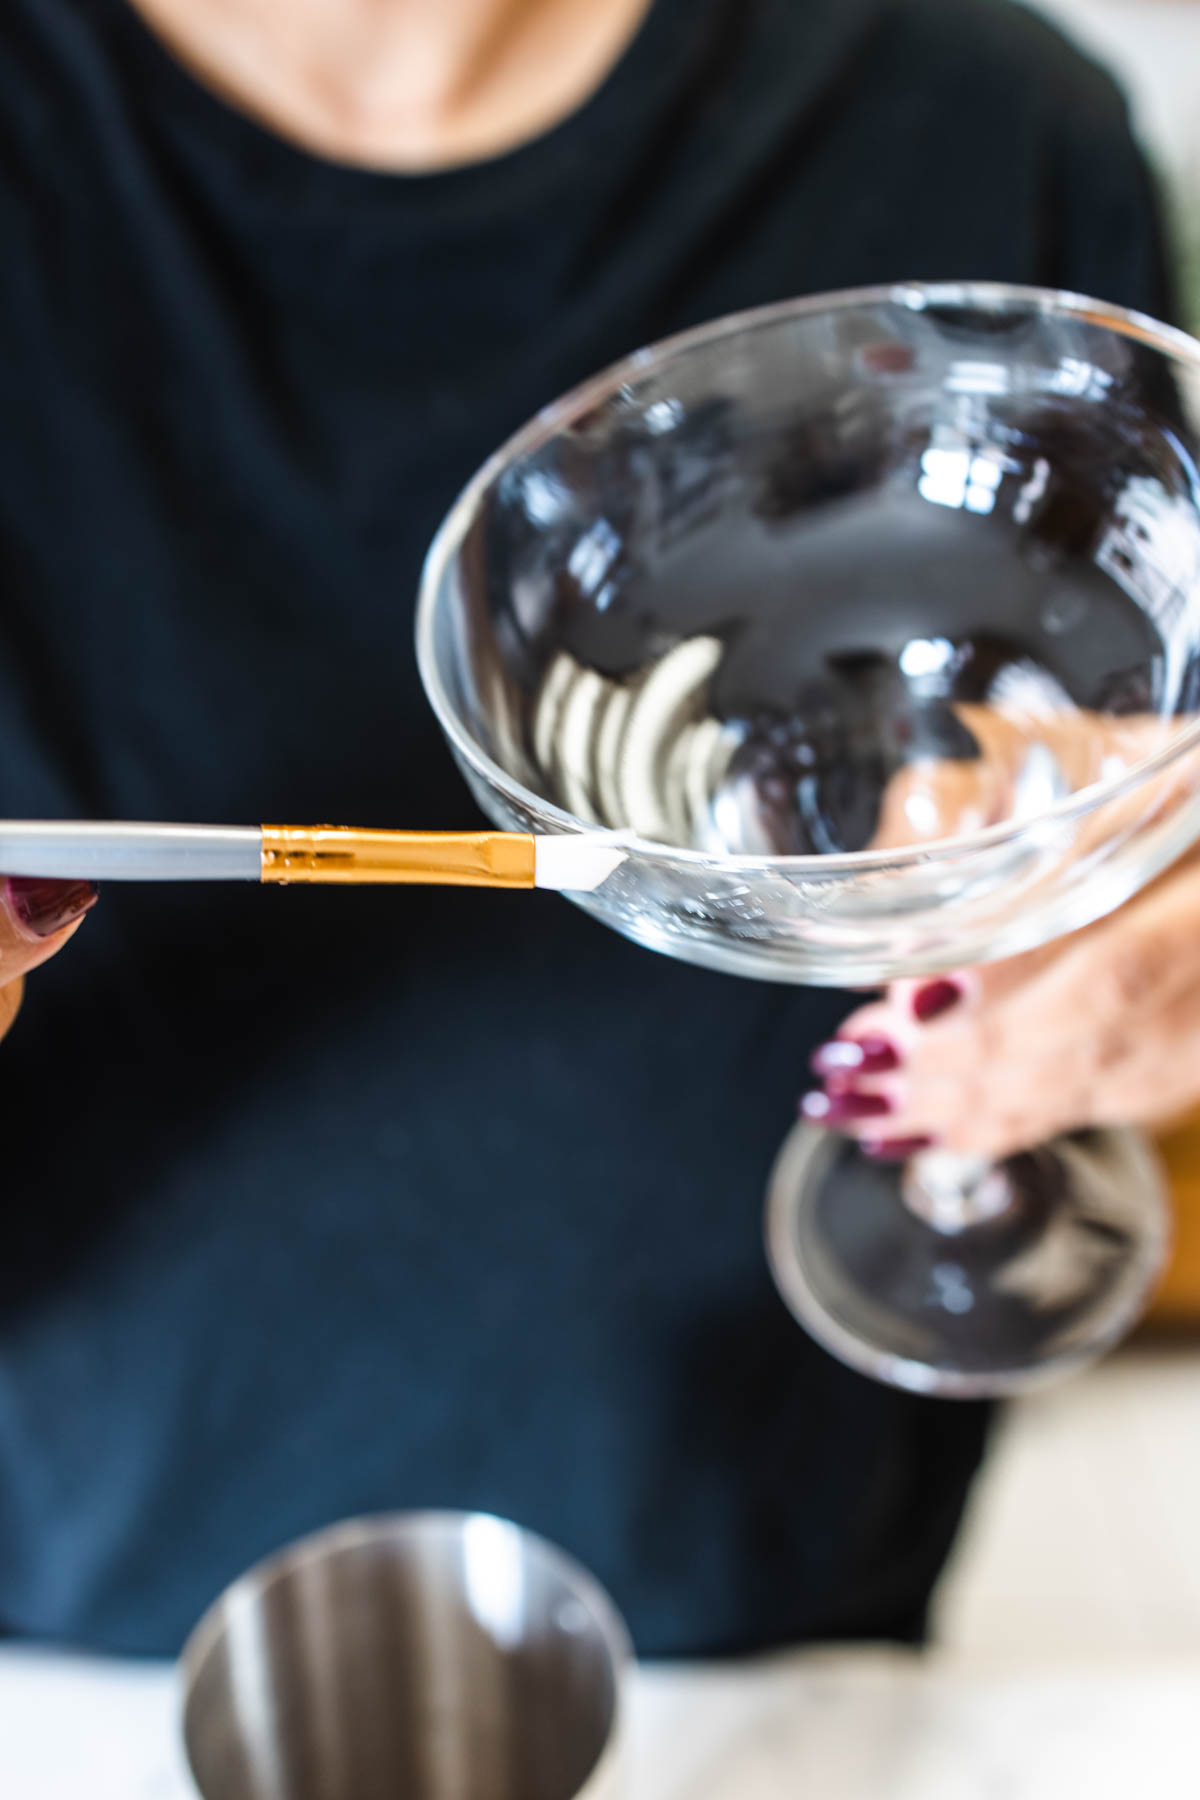 Moistening a portion of the margarita glass using a brush.